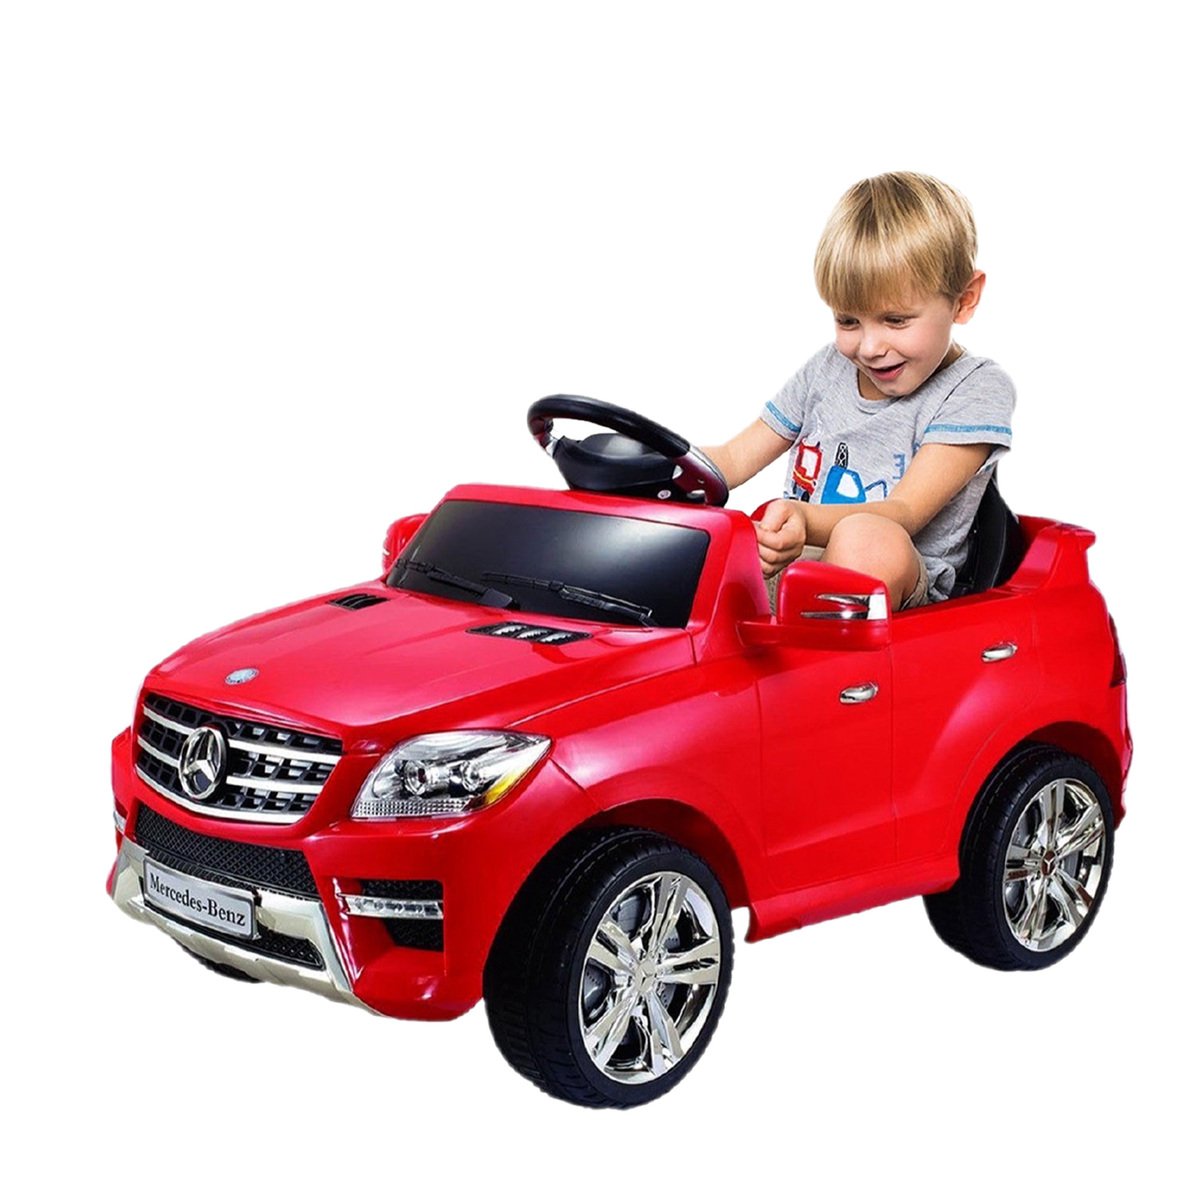 Lovely Baby Child Motor Car LB-75 (Color may vary)